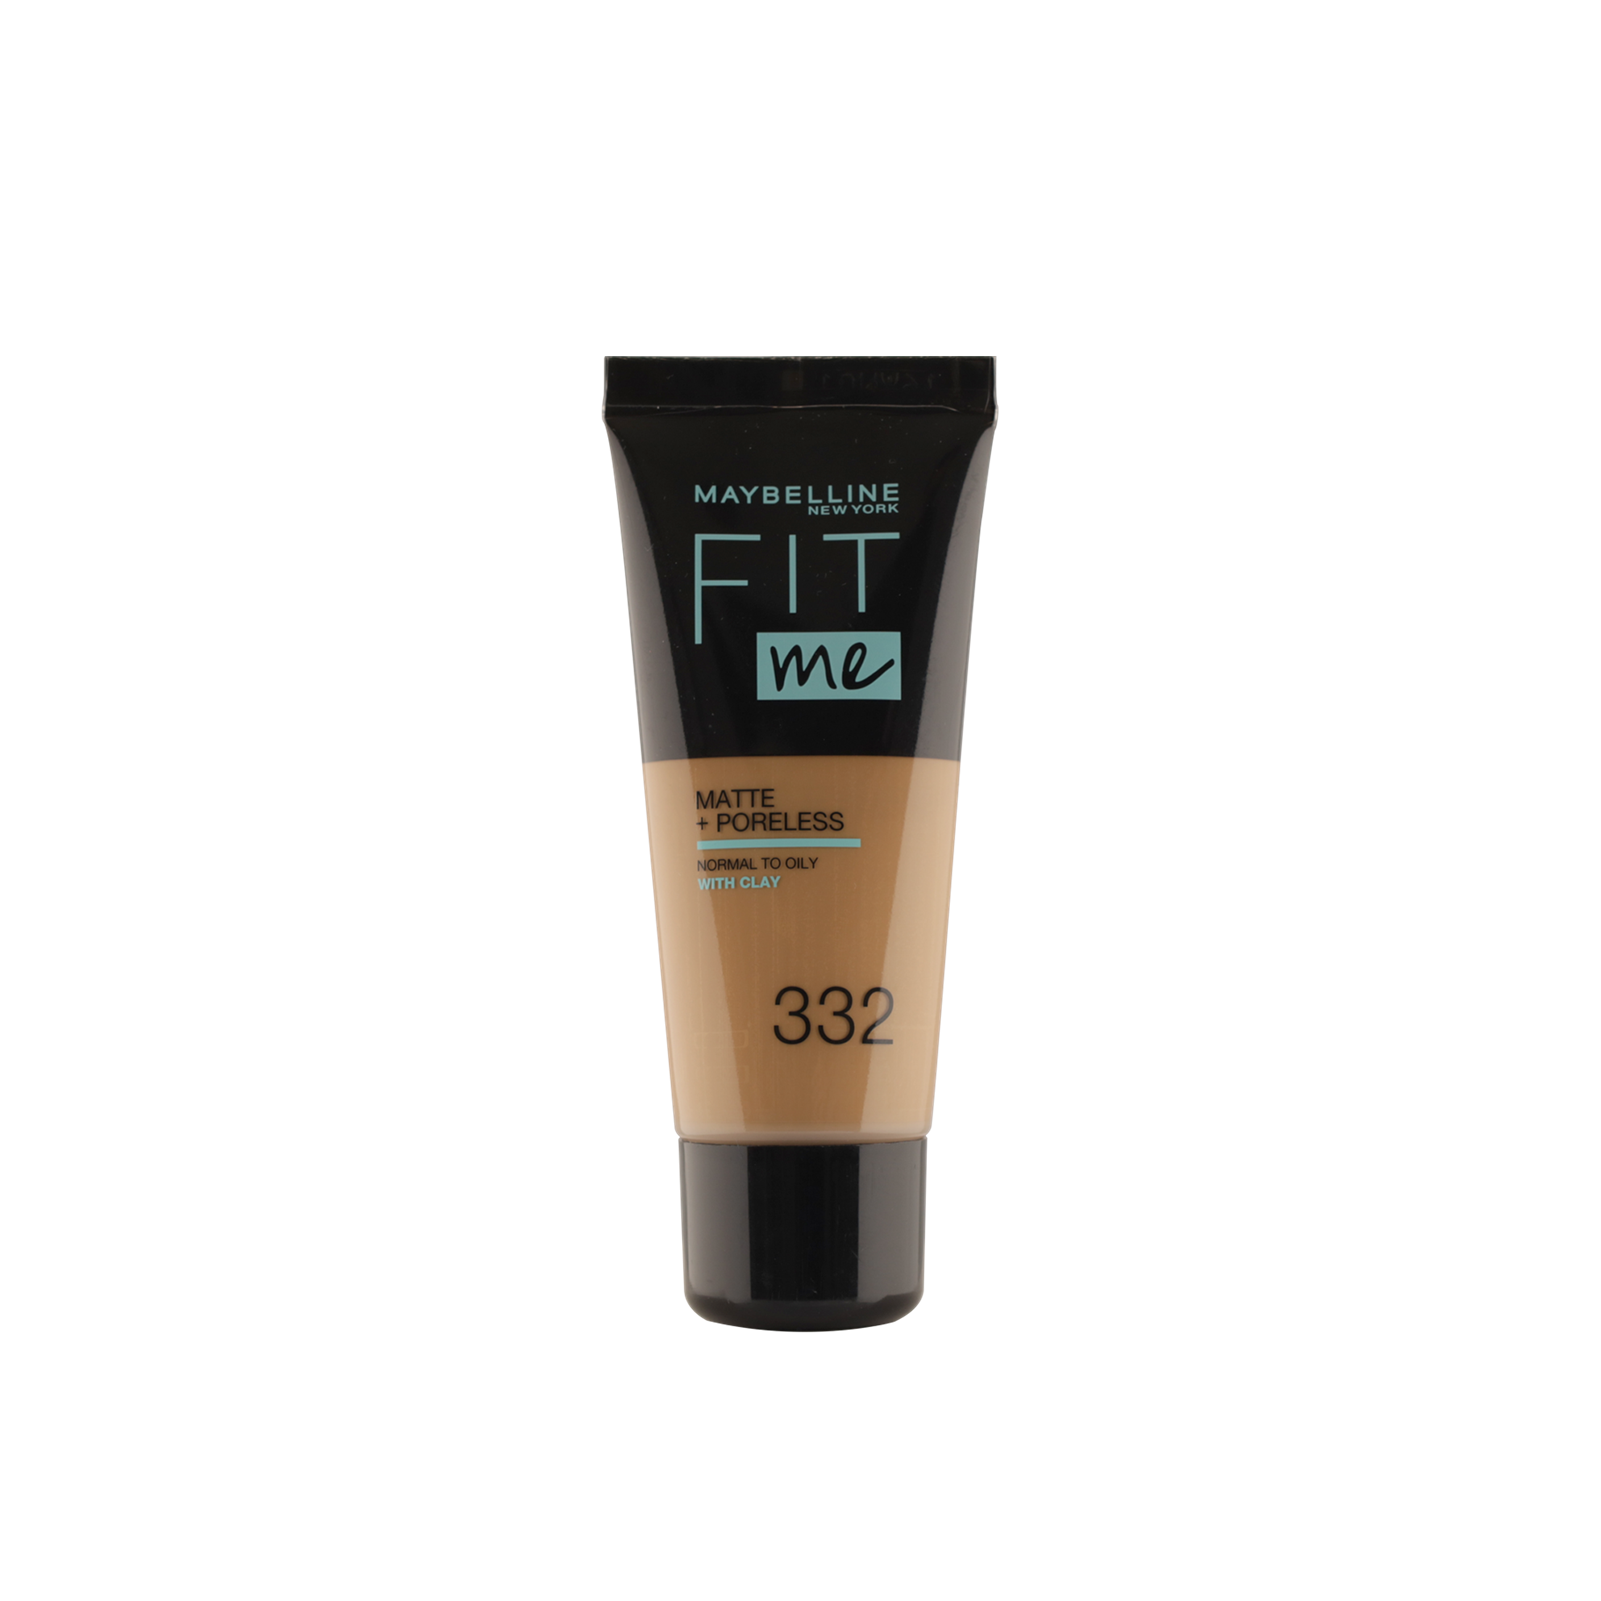 https://static.beautytocare.com/media/catalog/product/m/a/maybelline-fit-me-matte-poreless-foundation-332-golden-30ml.png